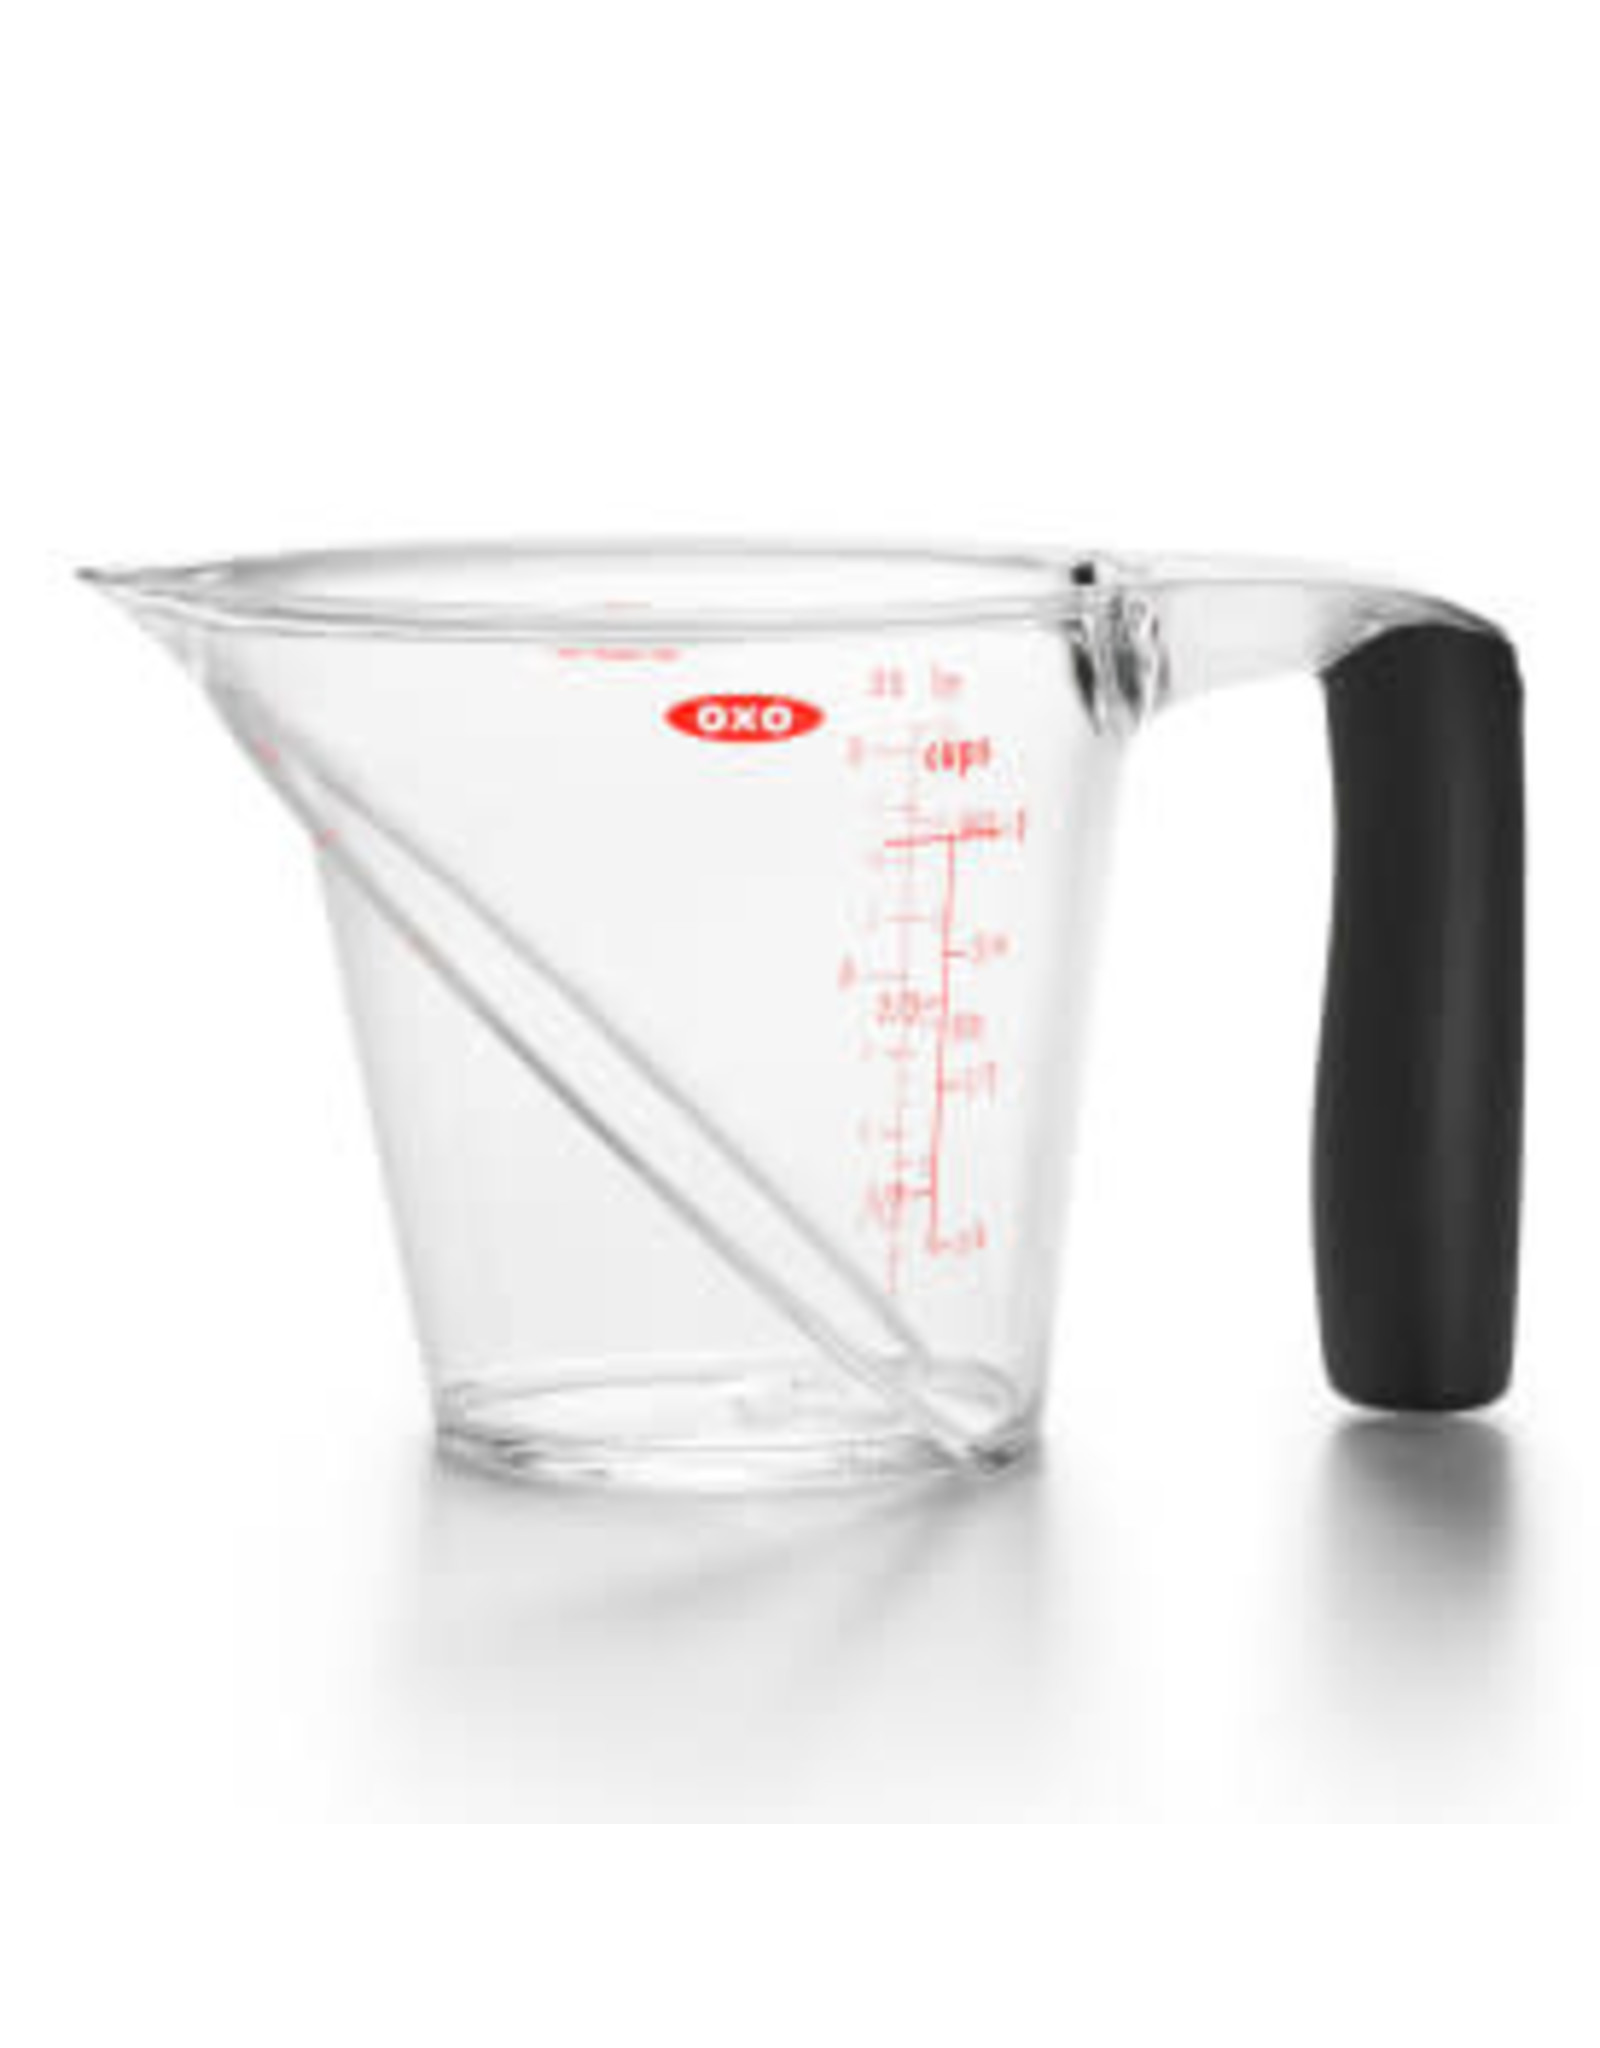 OXO OXO 1 Cup Angled Measuring Cup